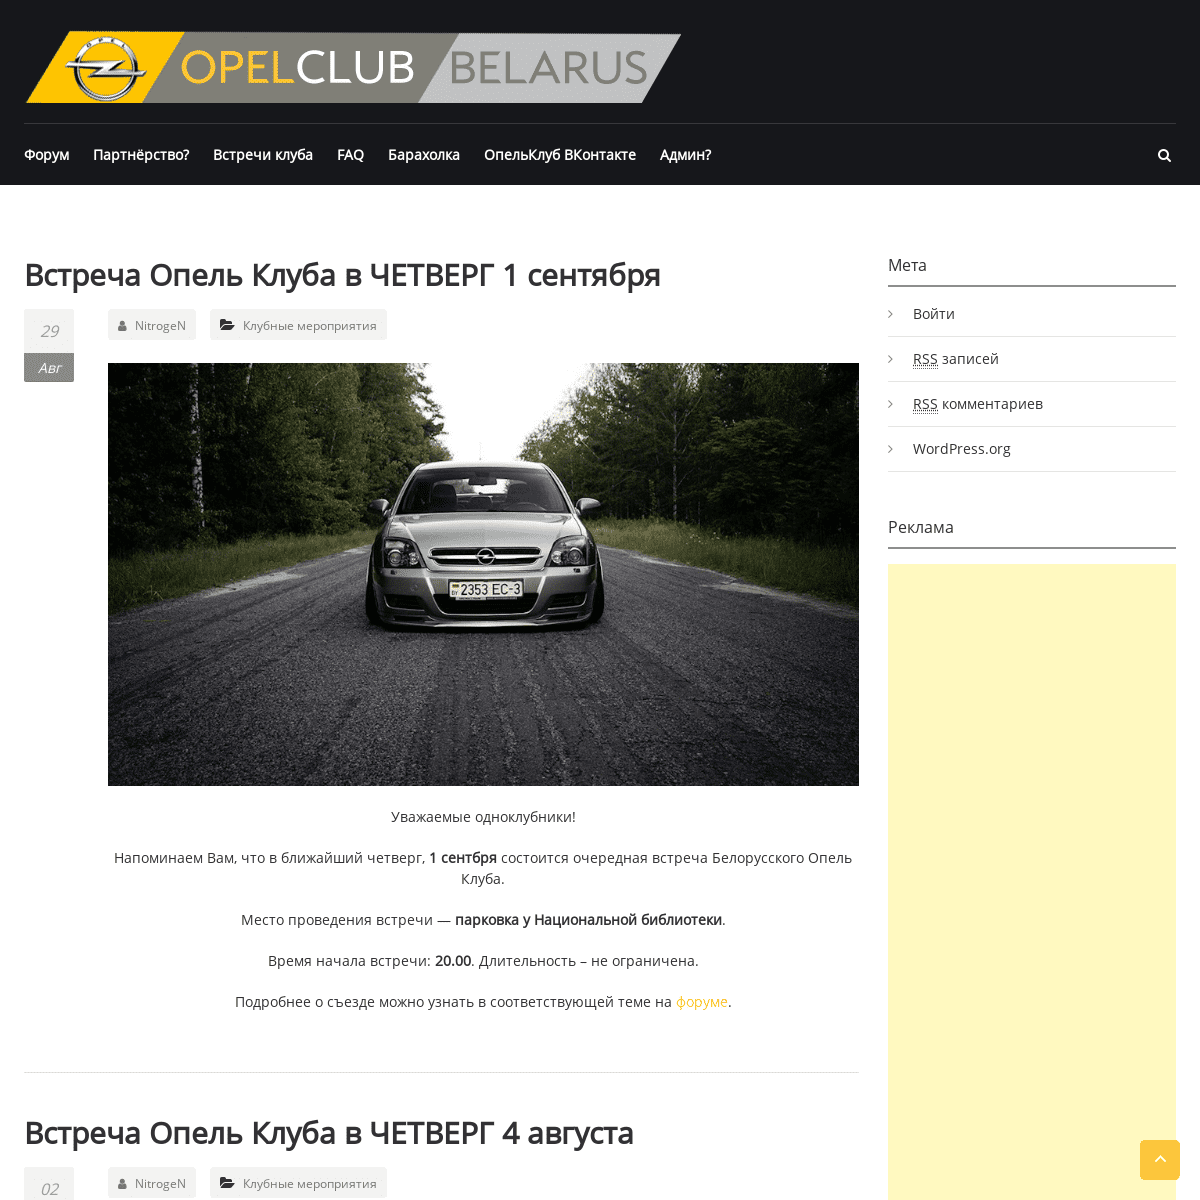 A complete backup of opelclub-by.com